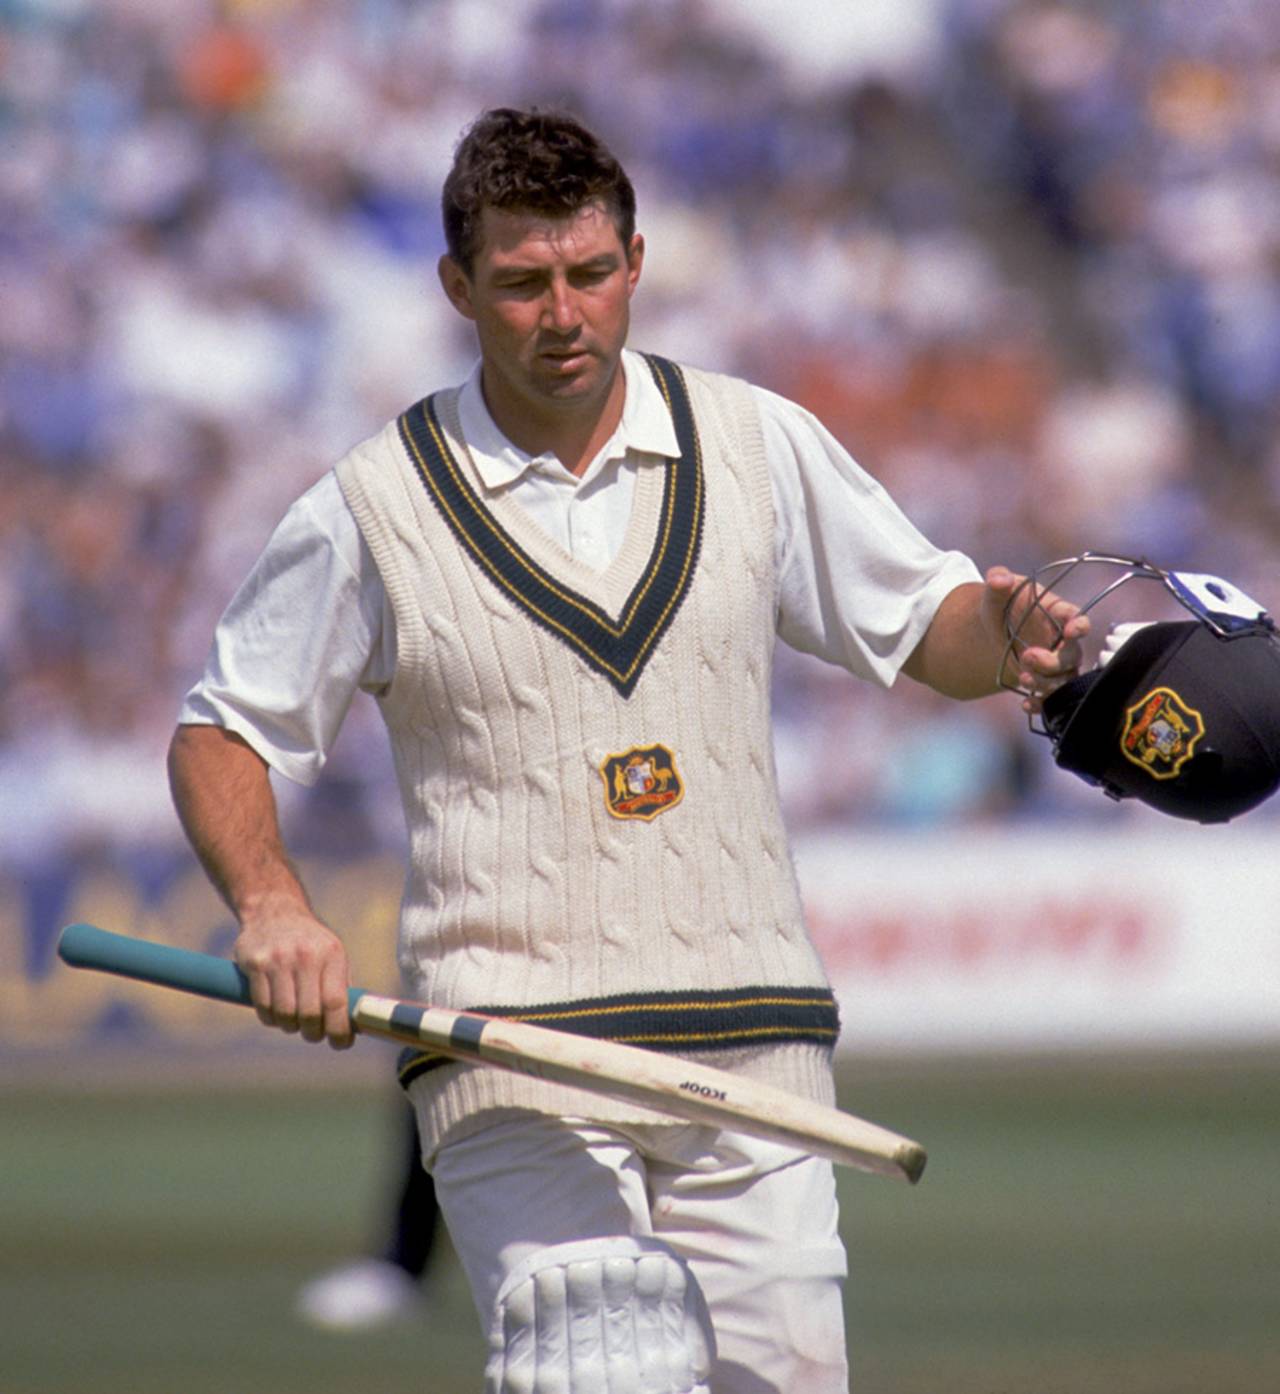 Geoff Marsh walks off after being dismissed, England v Australia, fifth Test, day two, Trent Bridge, August 11, 1989